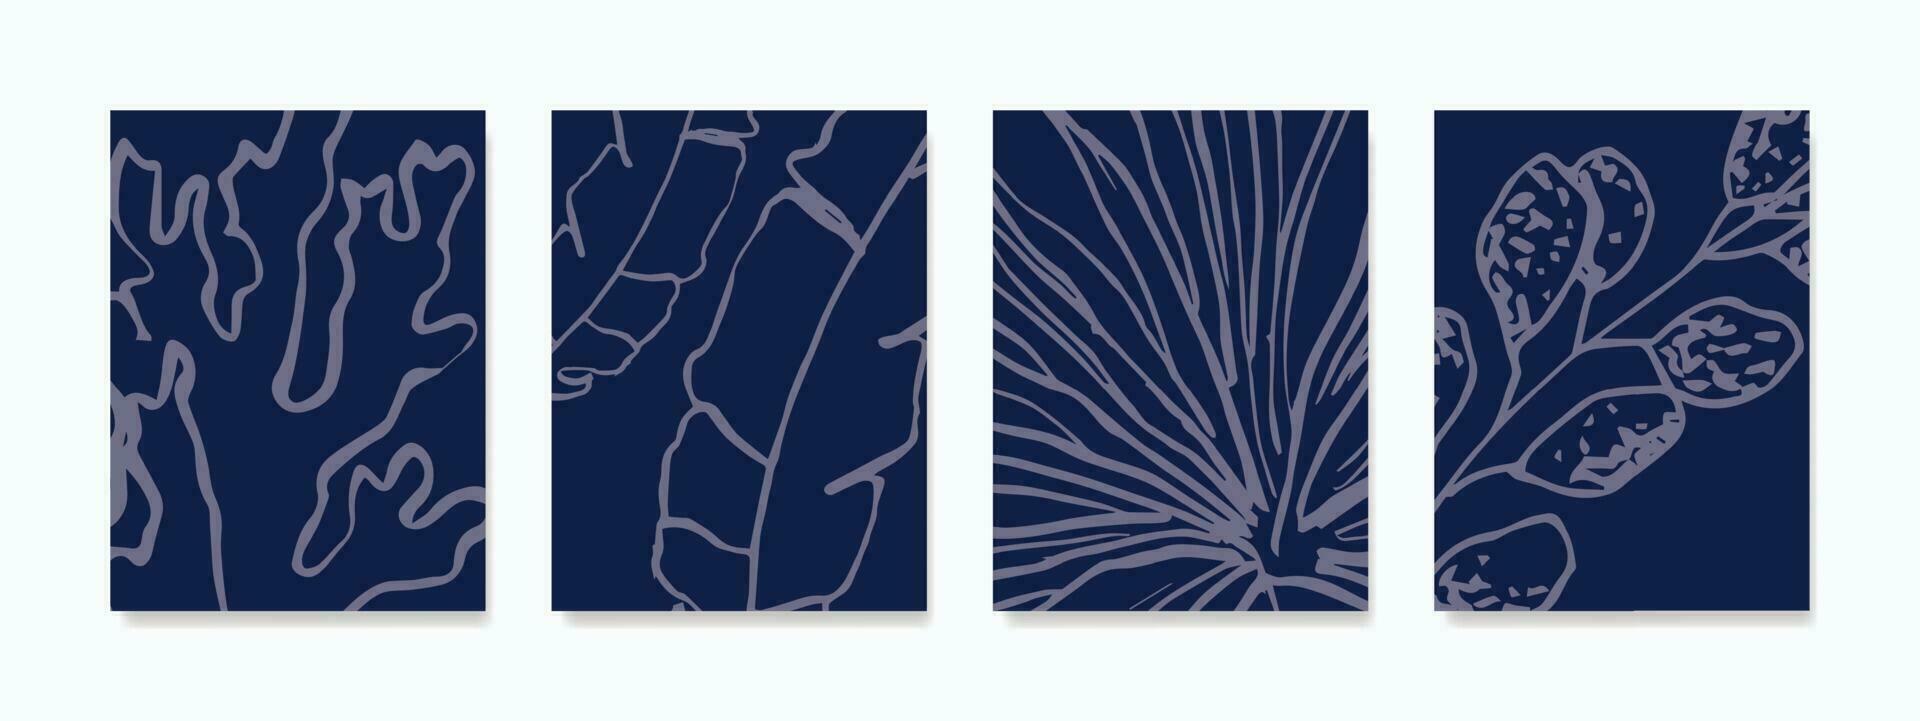 Leaf illustration wall art, featuring meticulously hand-drawn design lines in a captivating dark blue or purplish hue. vector